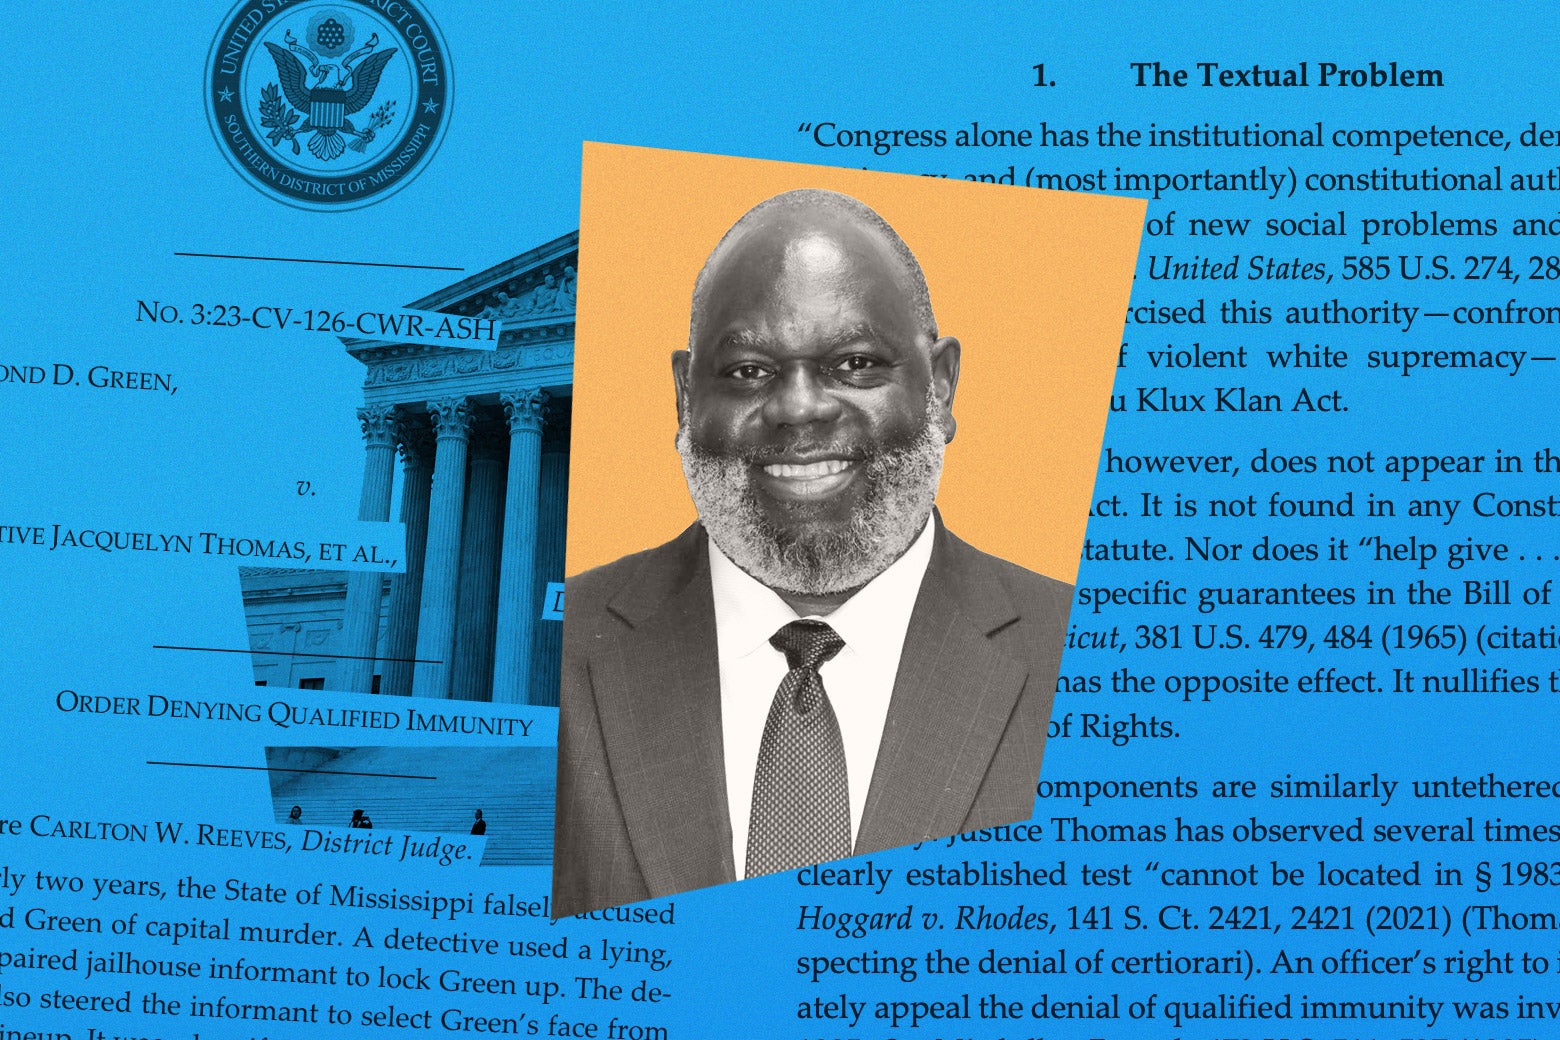 A photo collage combining an image of Judge Carlton Reeves, excerpts from his opinion, and the Supreme Court building.